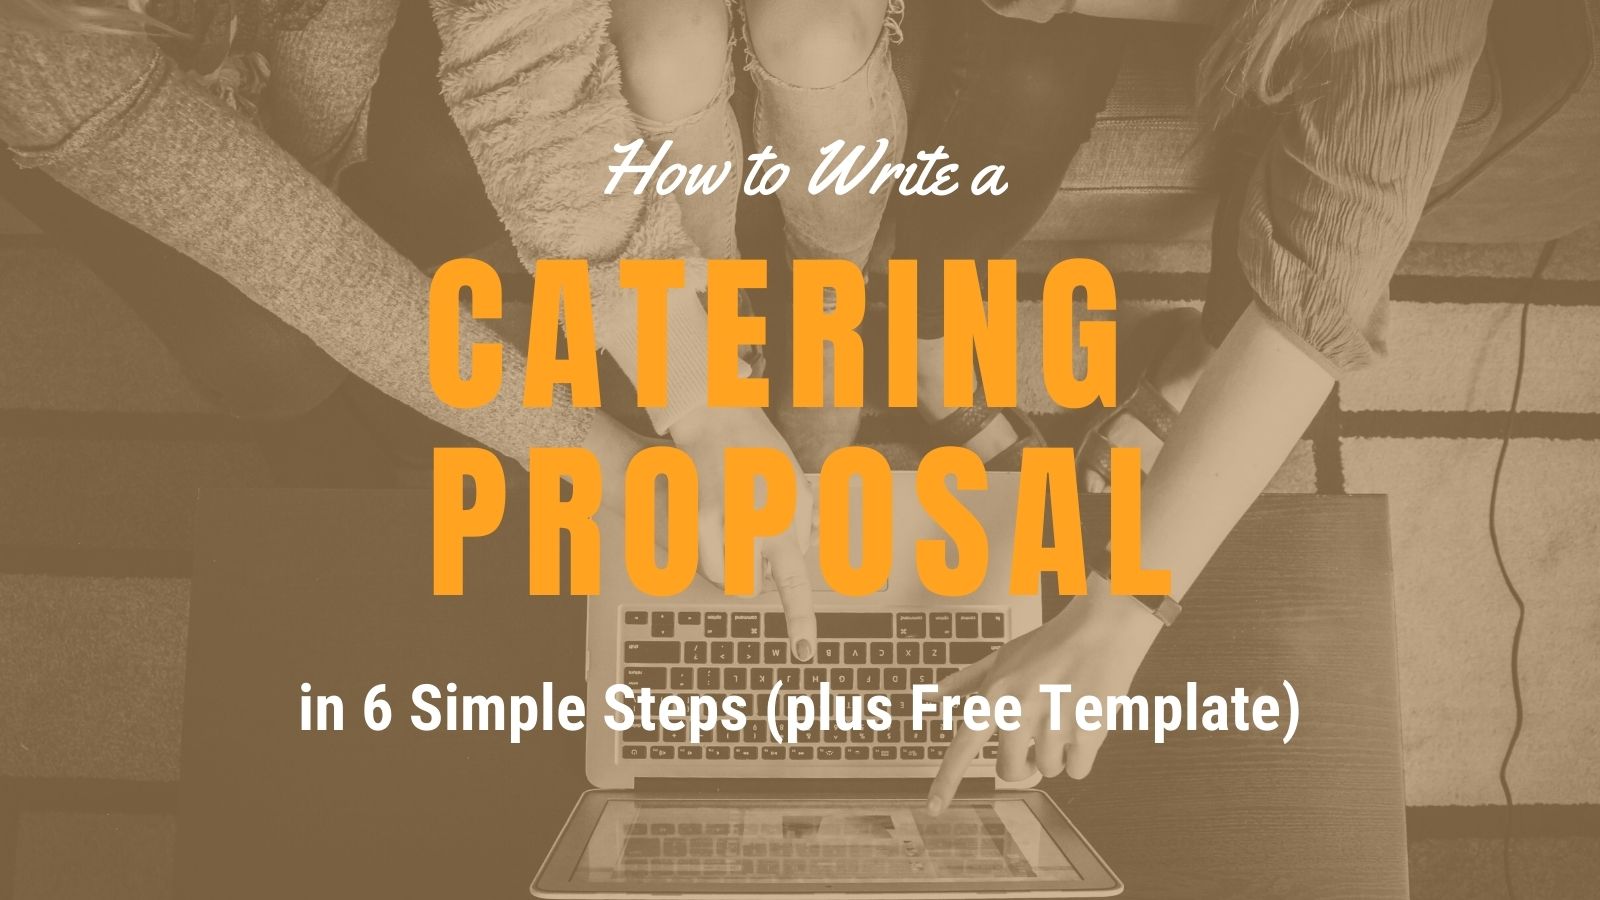 How To Write A Catering Contract